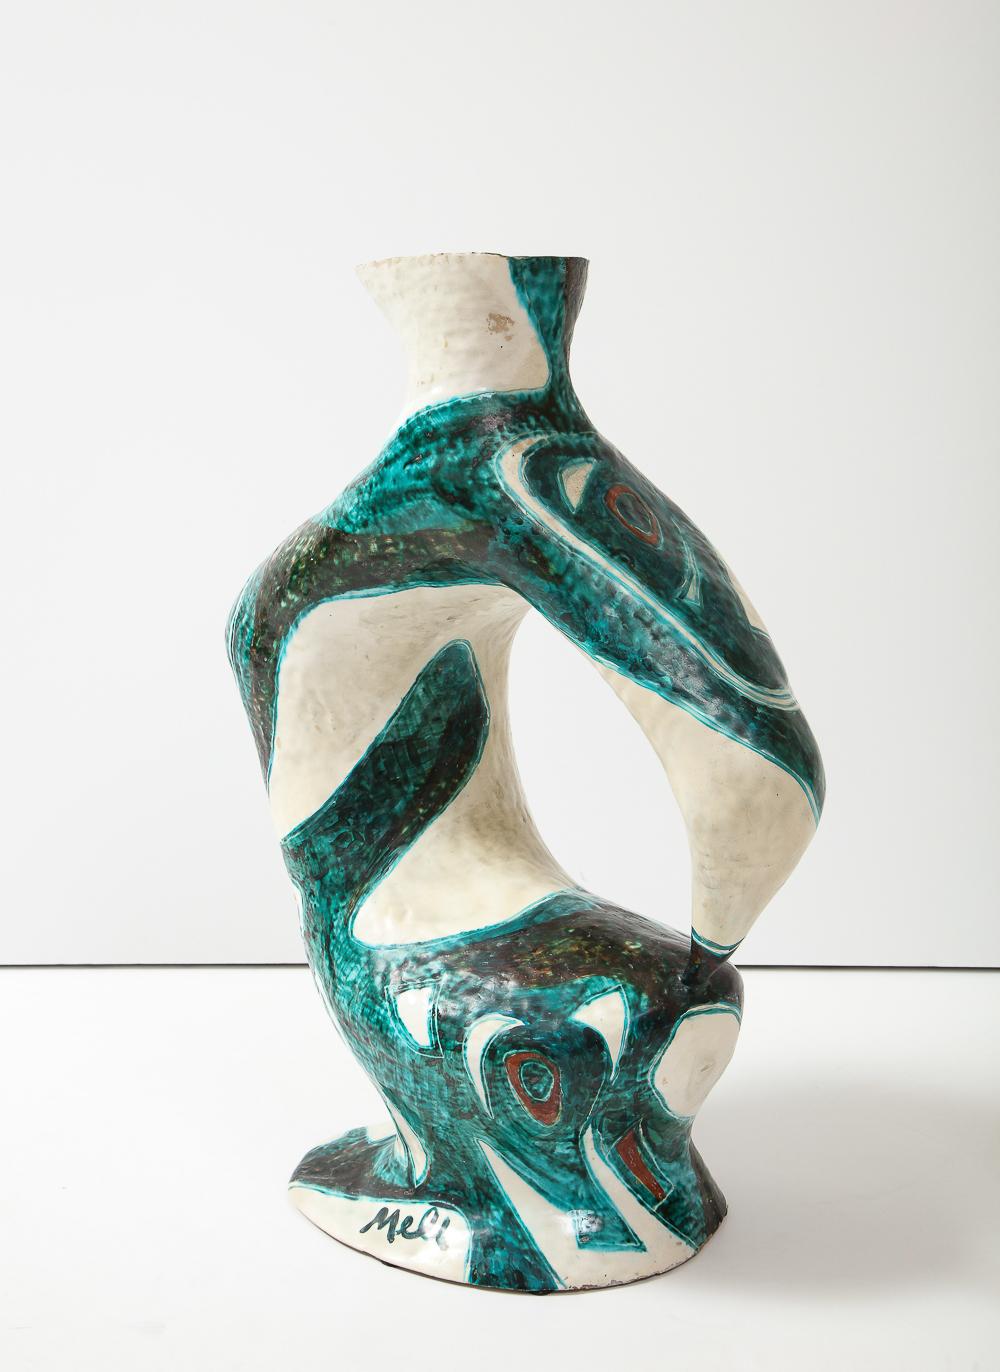 Glazed ceramic. Hand-formed sculptural vessel with abstract surface decoration in green & cream. Sicilian-born and active in Rome, Salvatore Meli drew from the richness and dignity of Etruscan and Greek pottery, establishing a style that was